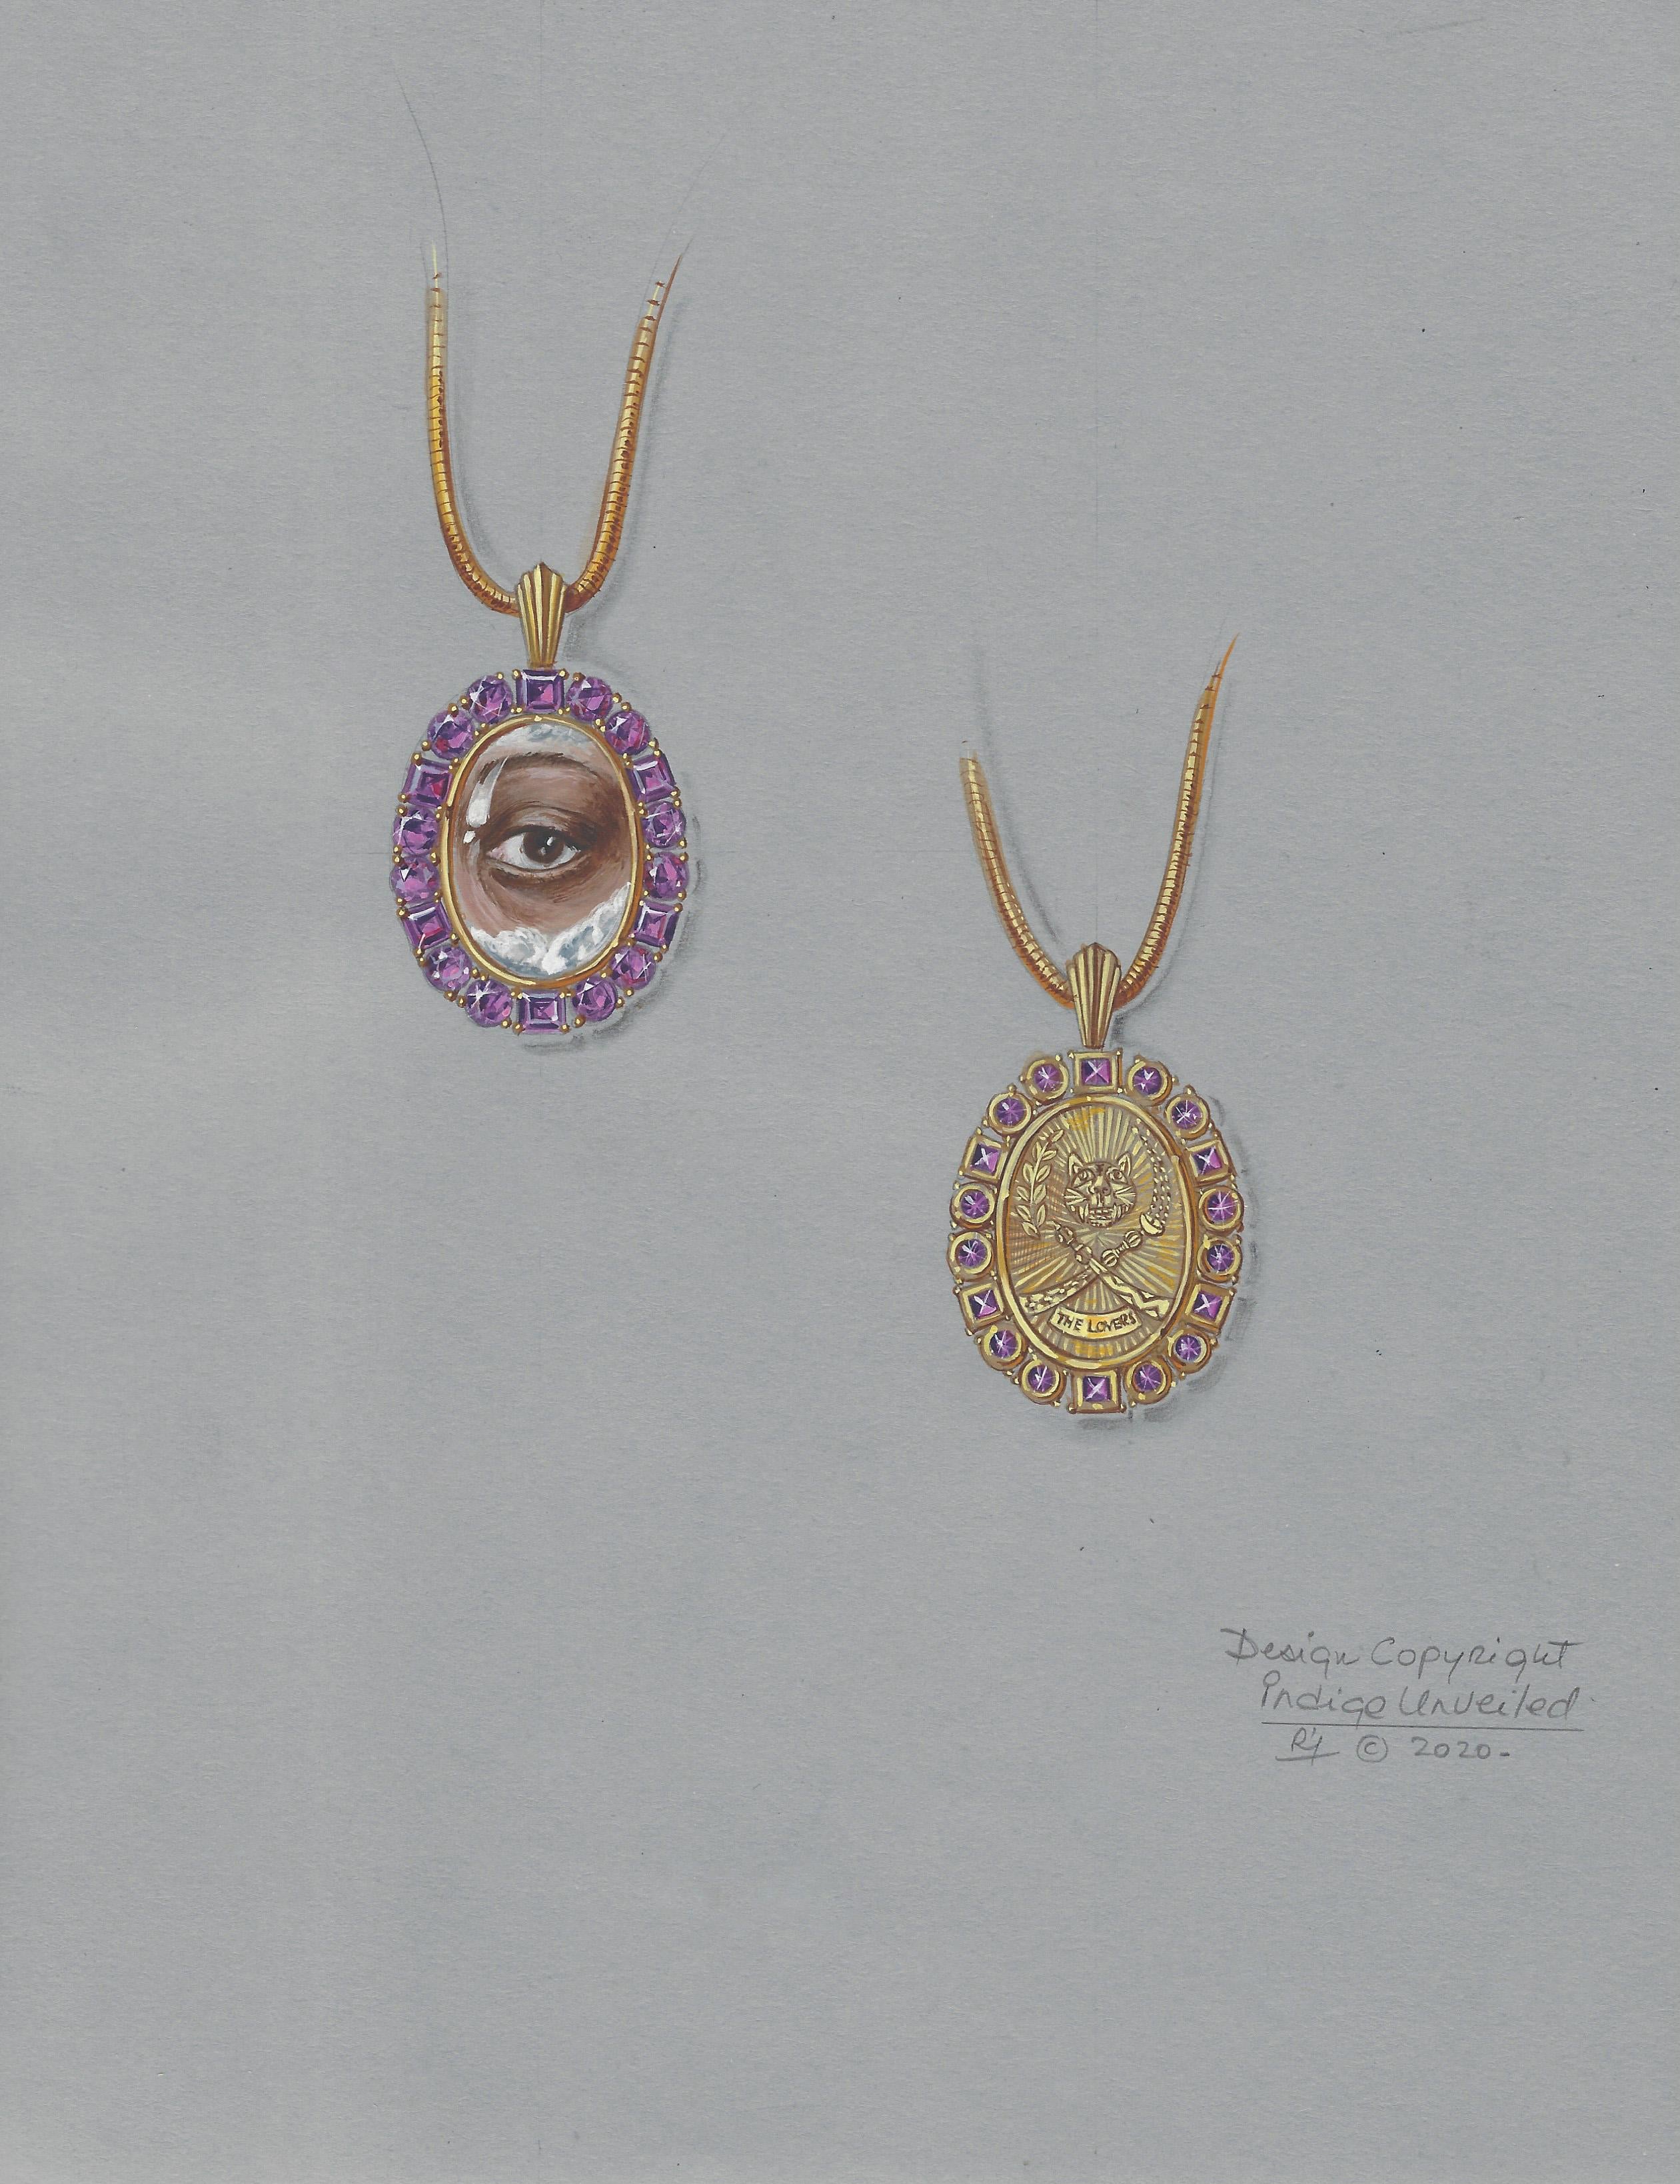 This piece created by Indigo Unveiled, features a one-of-a kind miniature eye portrait carefully made in hot enamel. It is set into 14k gold with a diamond bezel, and swivels to a medallion with customizable name plate, gemstones, and symbol that